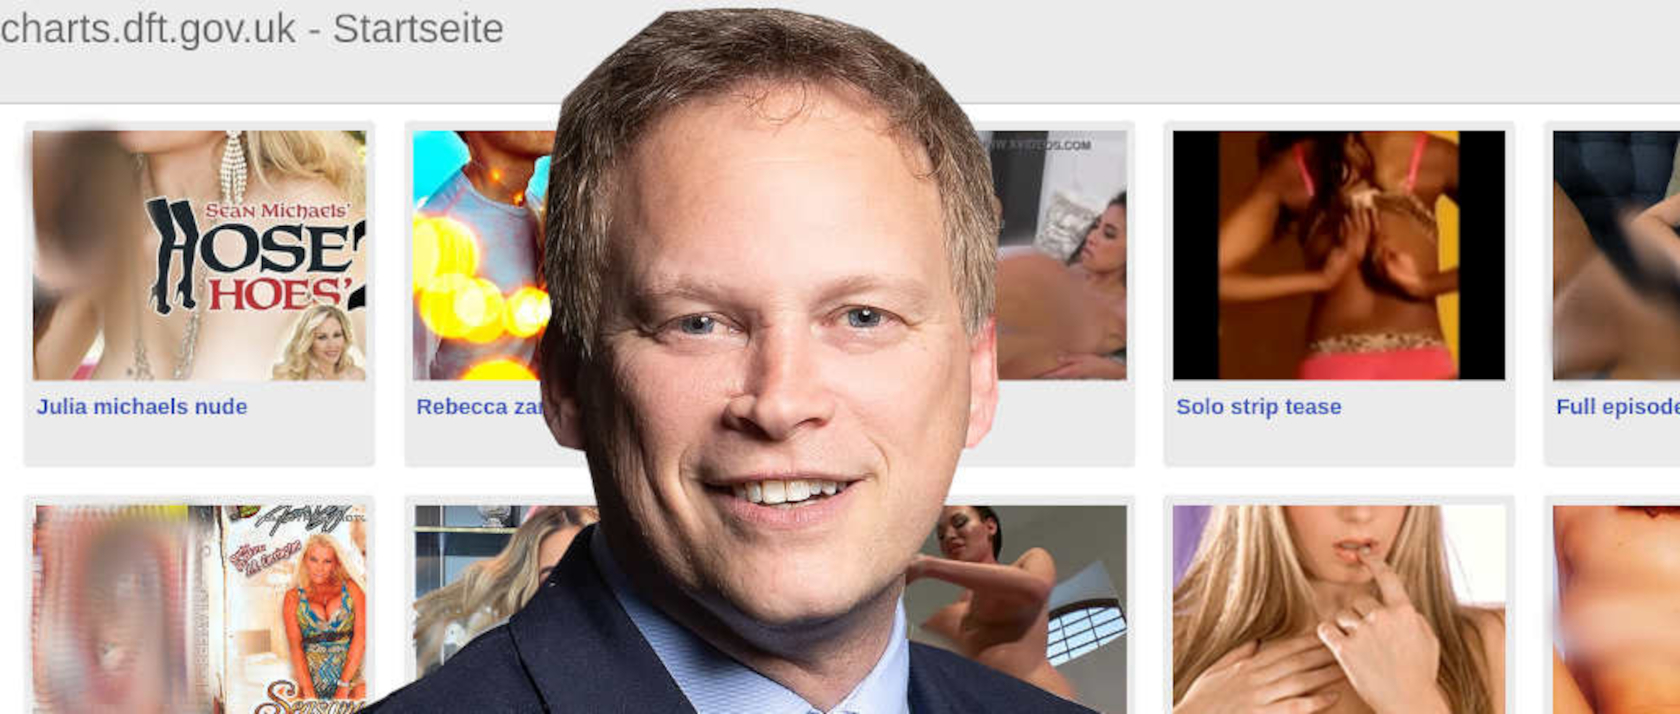 The right honorable Grant Schapps against a censored pornographic background